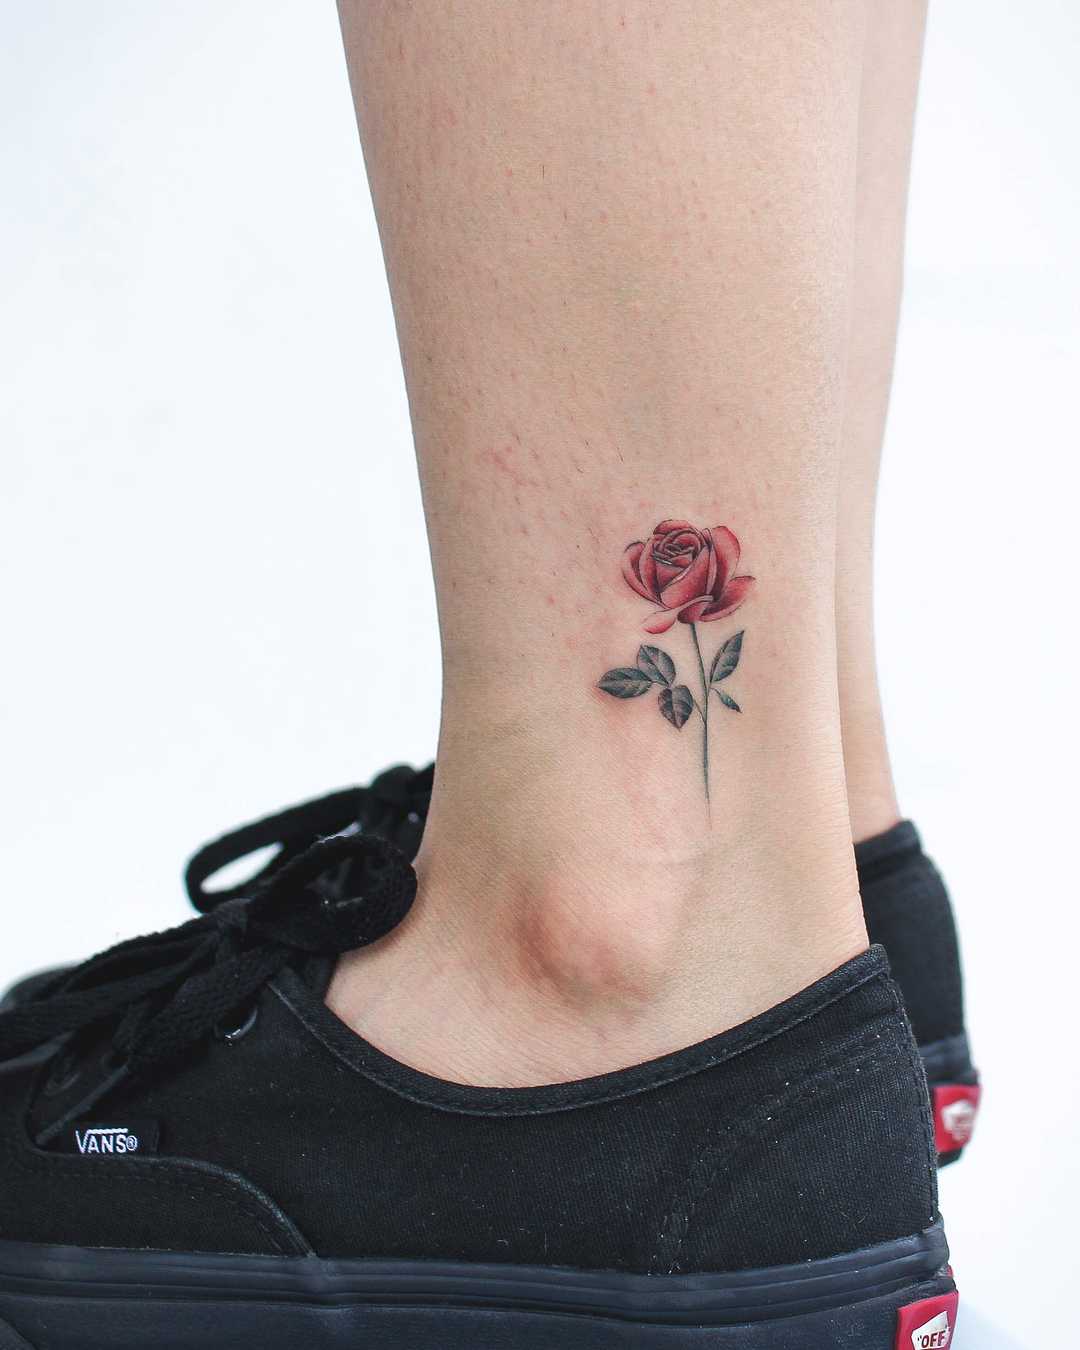 Little red rose tattoo on the left ankle